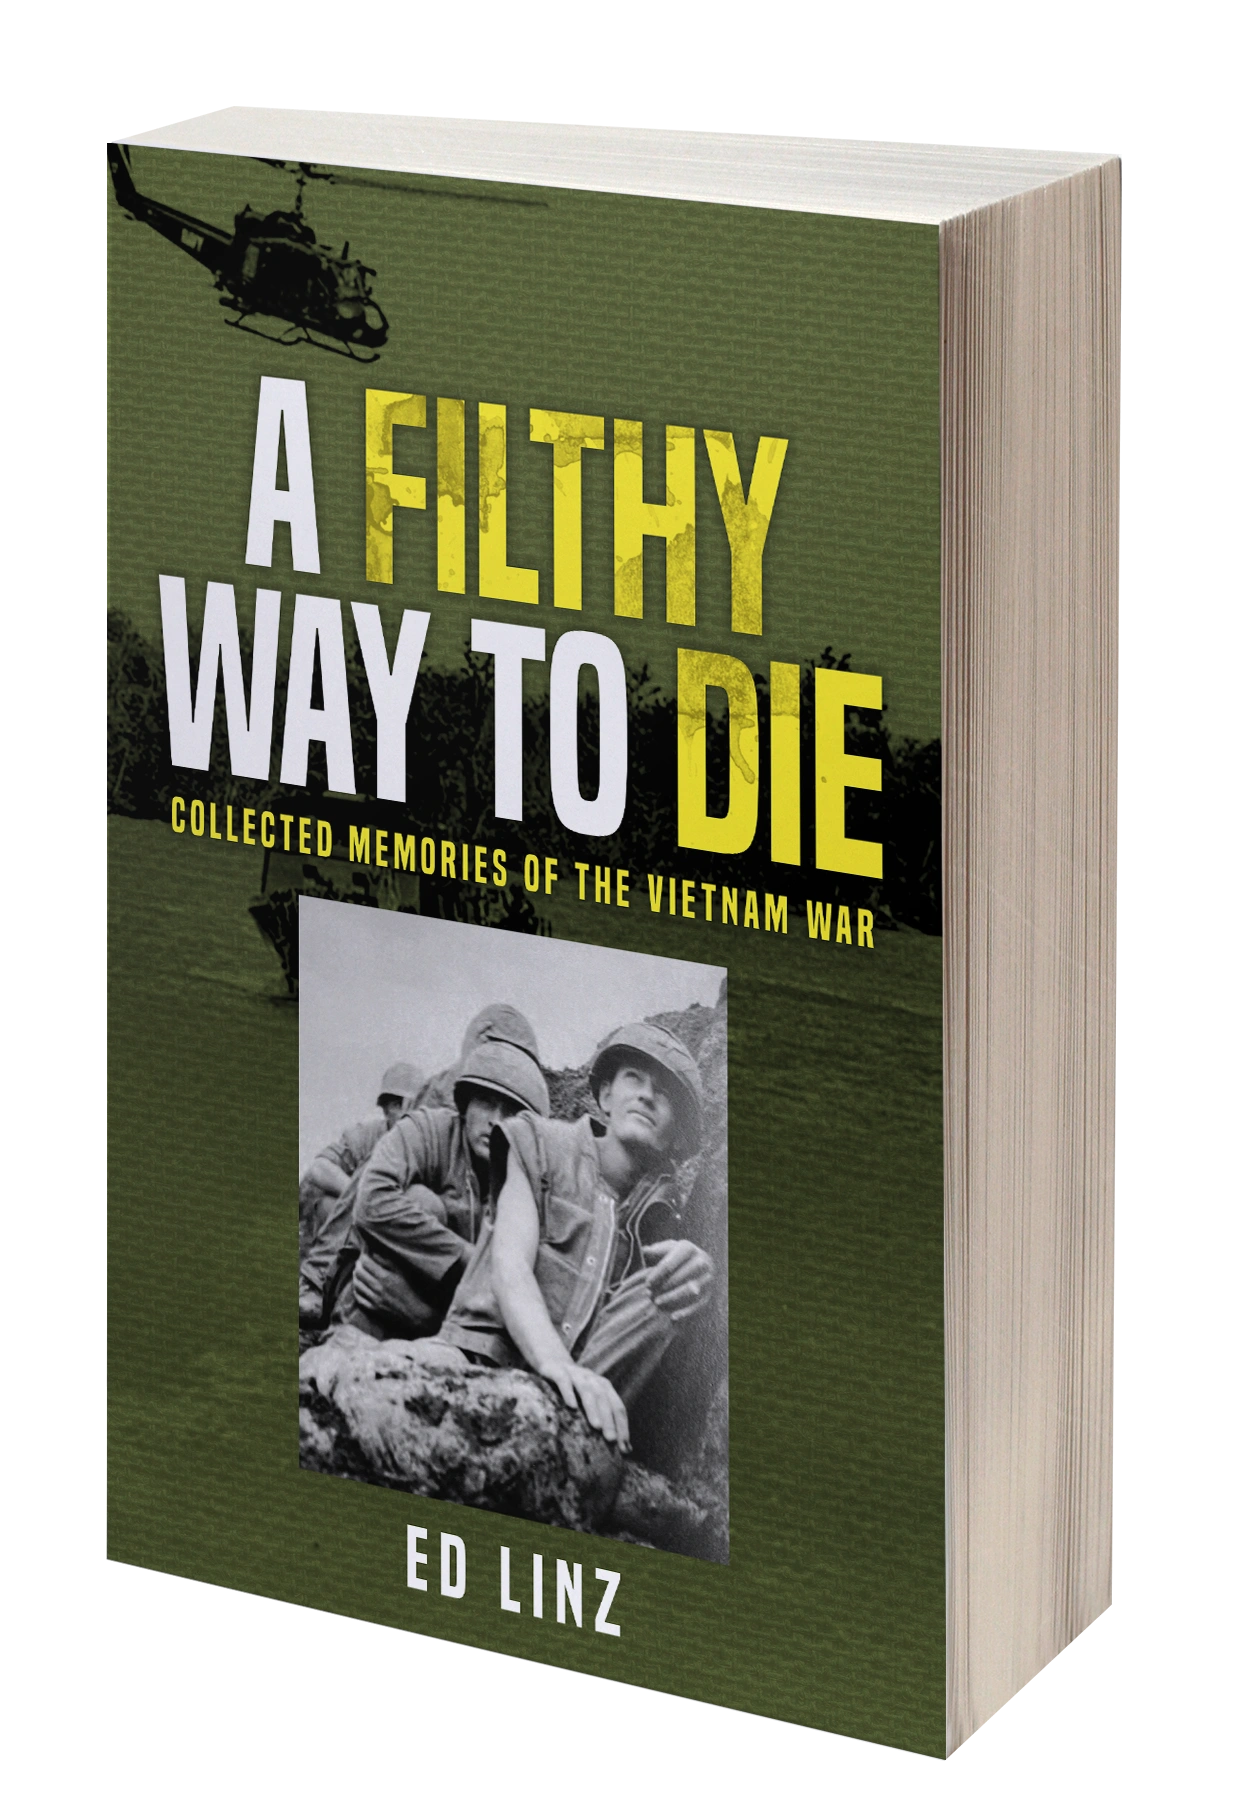 My latest book!   A Filthy Way to Die, Collected Memories of the Vietnam War.   Over  over 60 first-